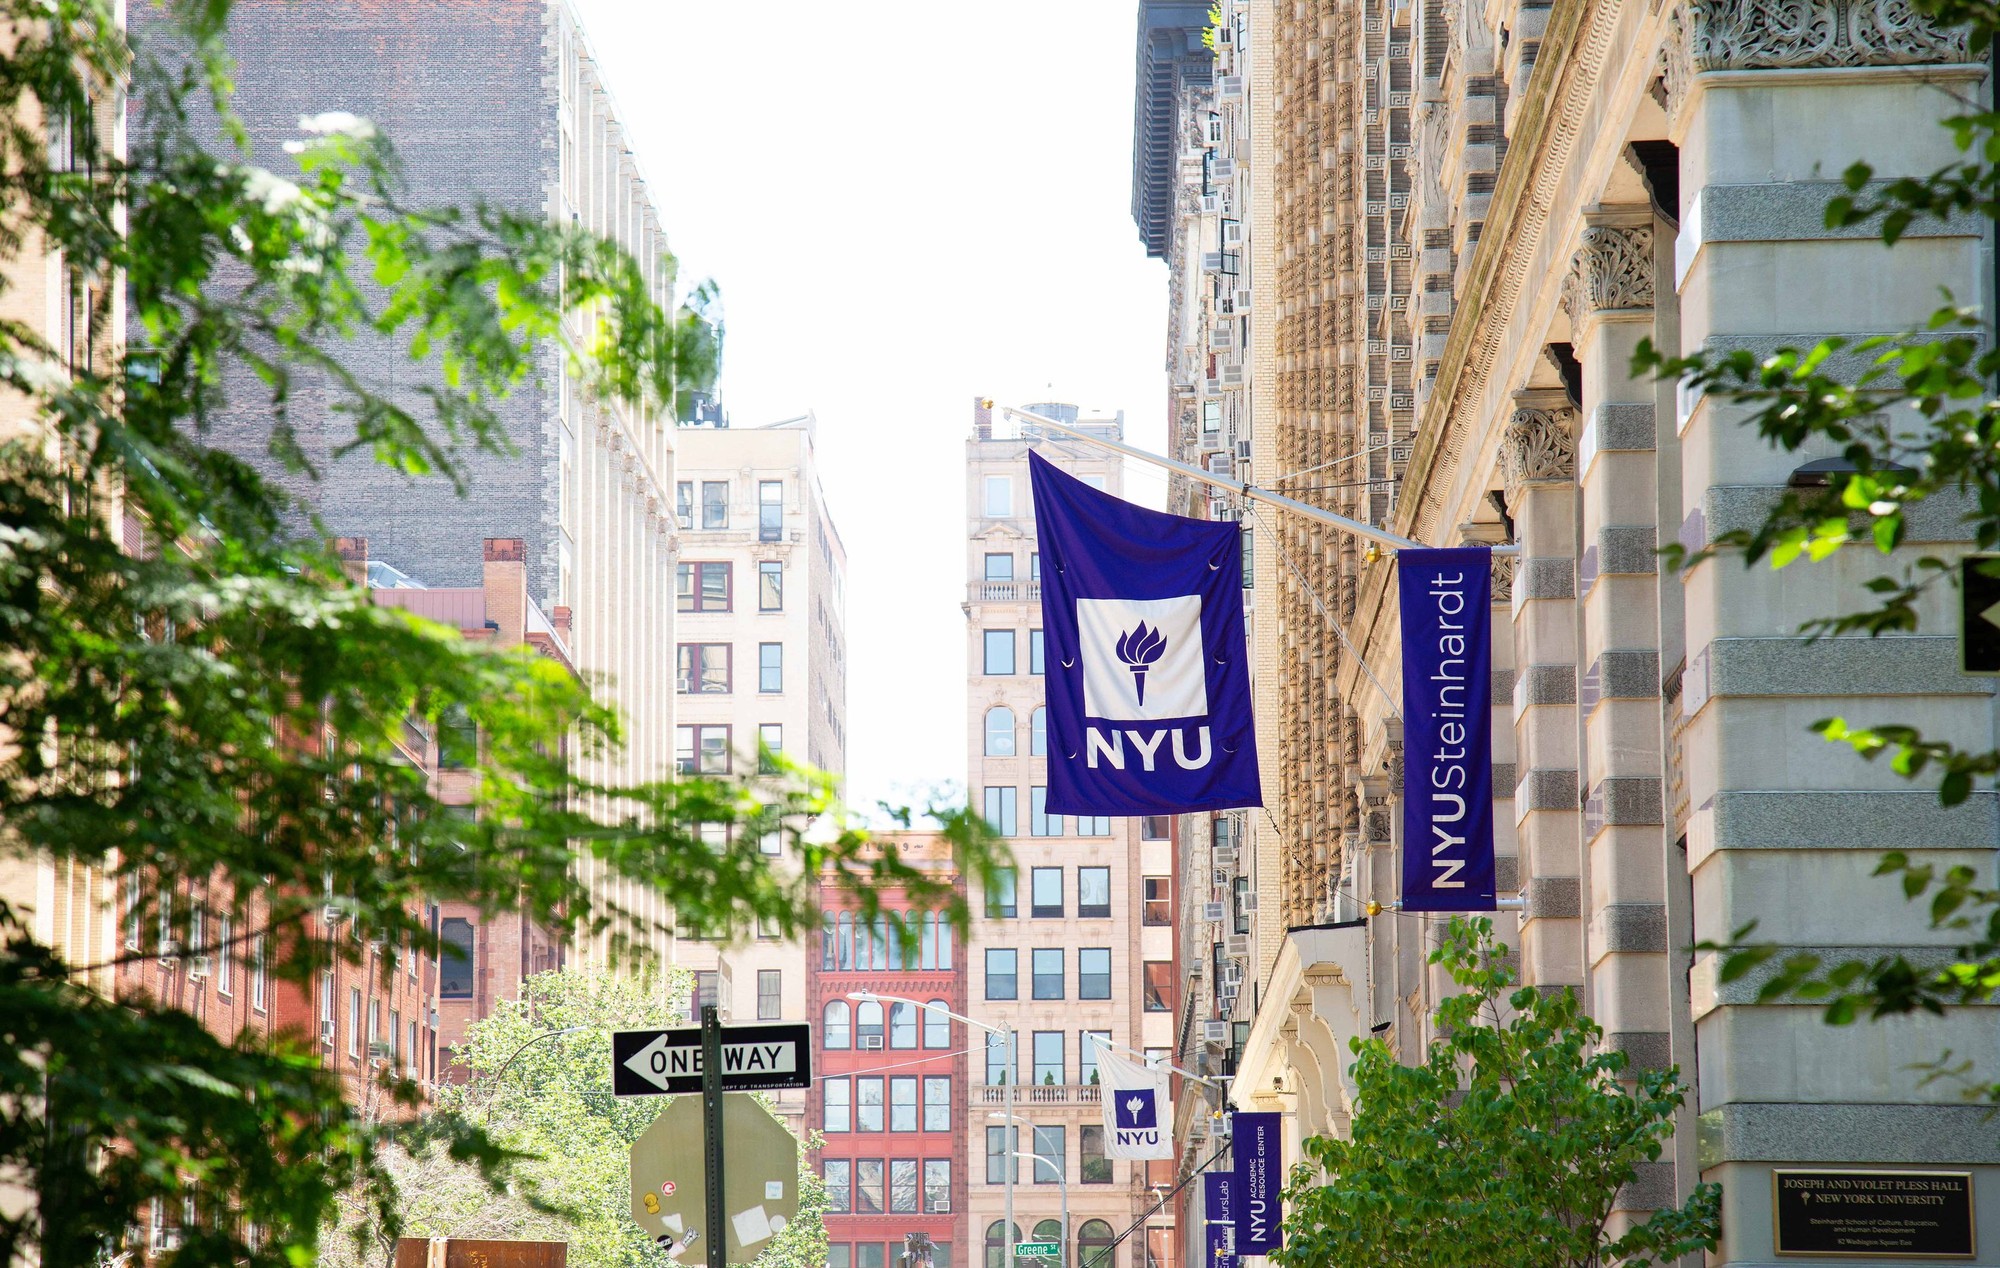 The NYU campus in New York City.